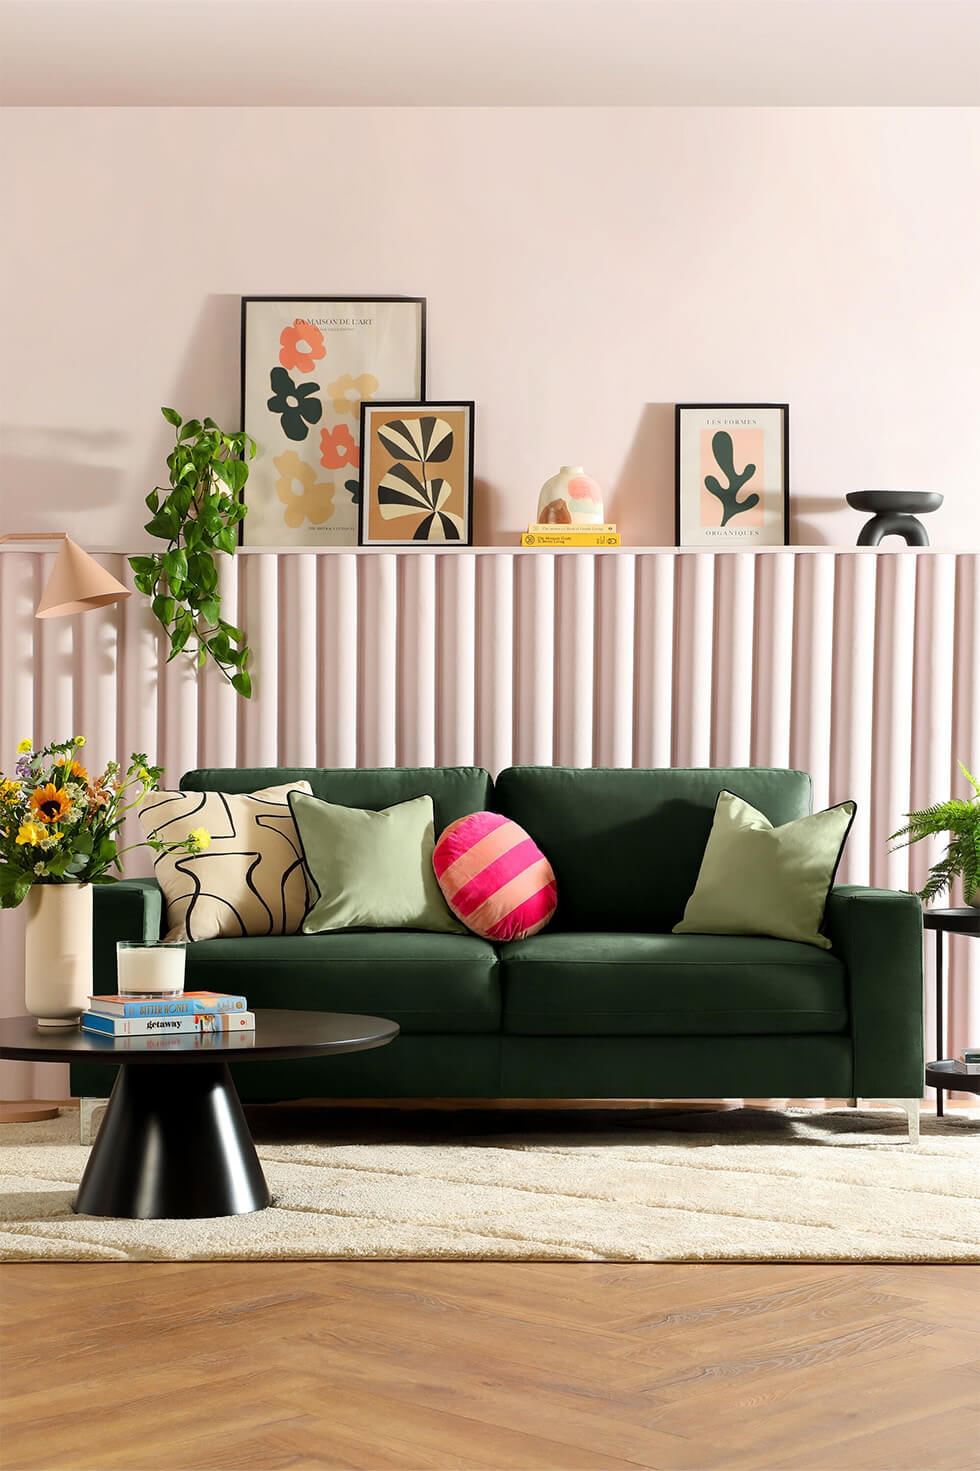 Boho style living room with colourful and abstract artwork